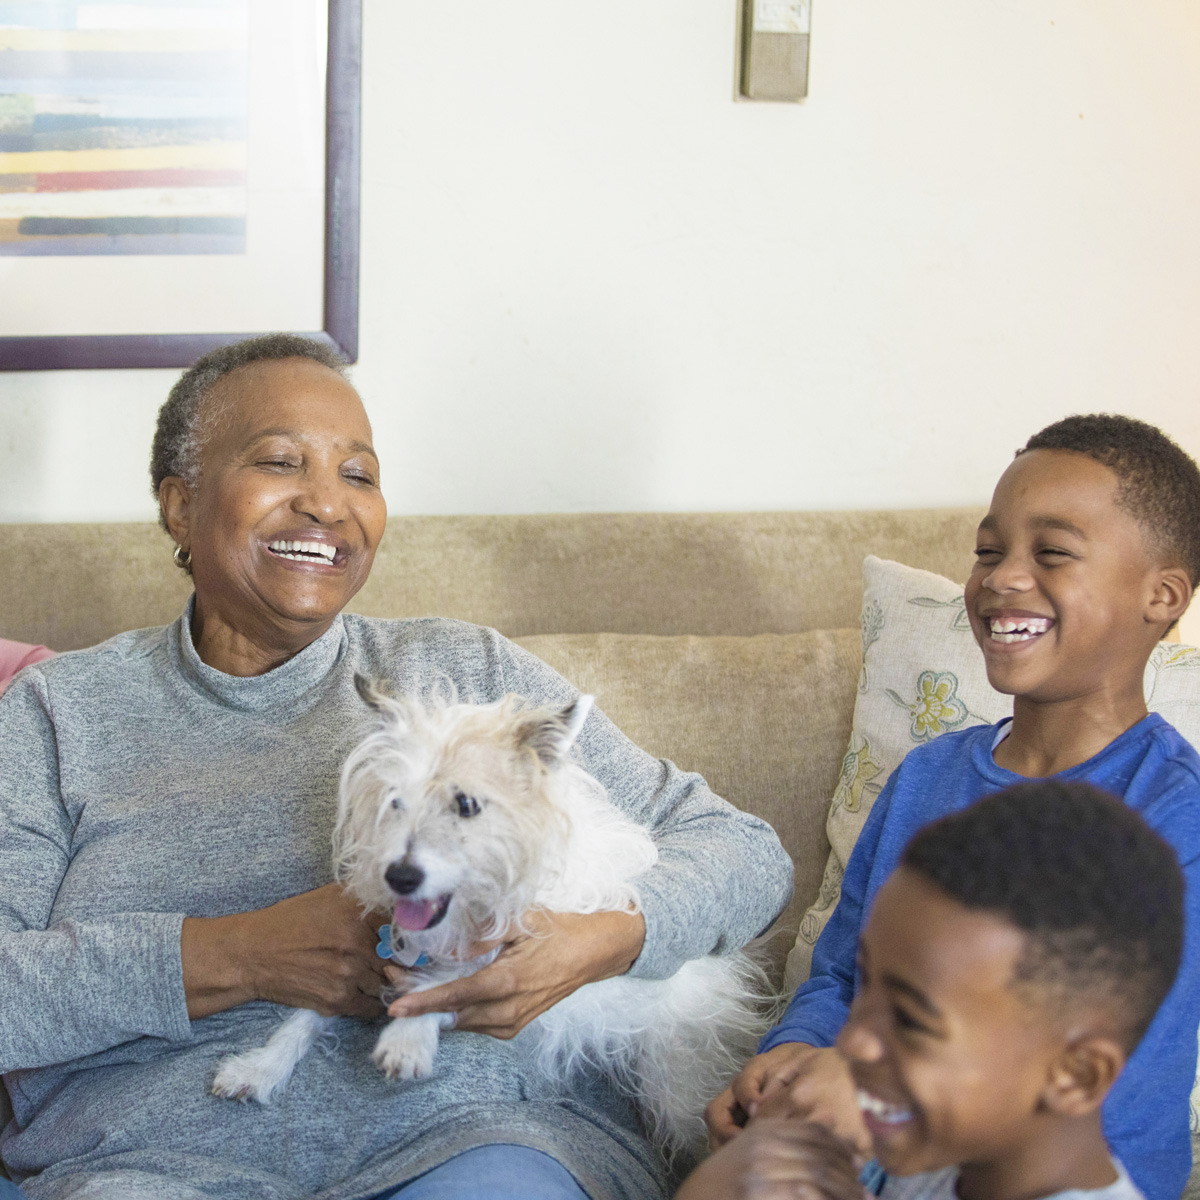 A grandmother on the couch smiling and laughing with her two grandsons while petting a small dog on her lap.